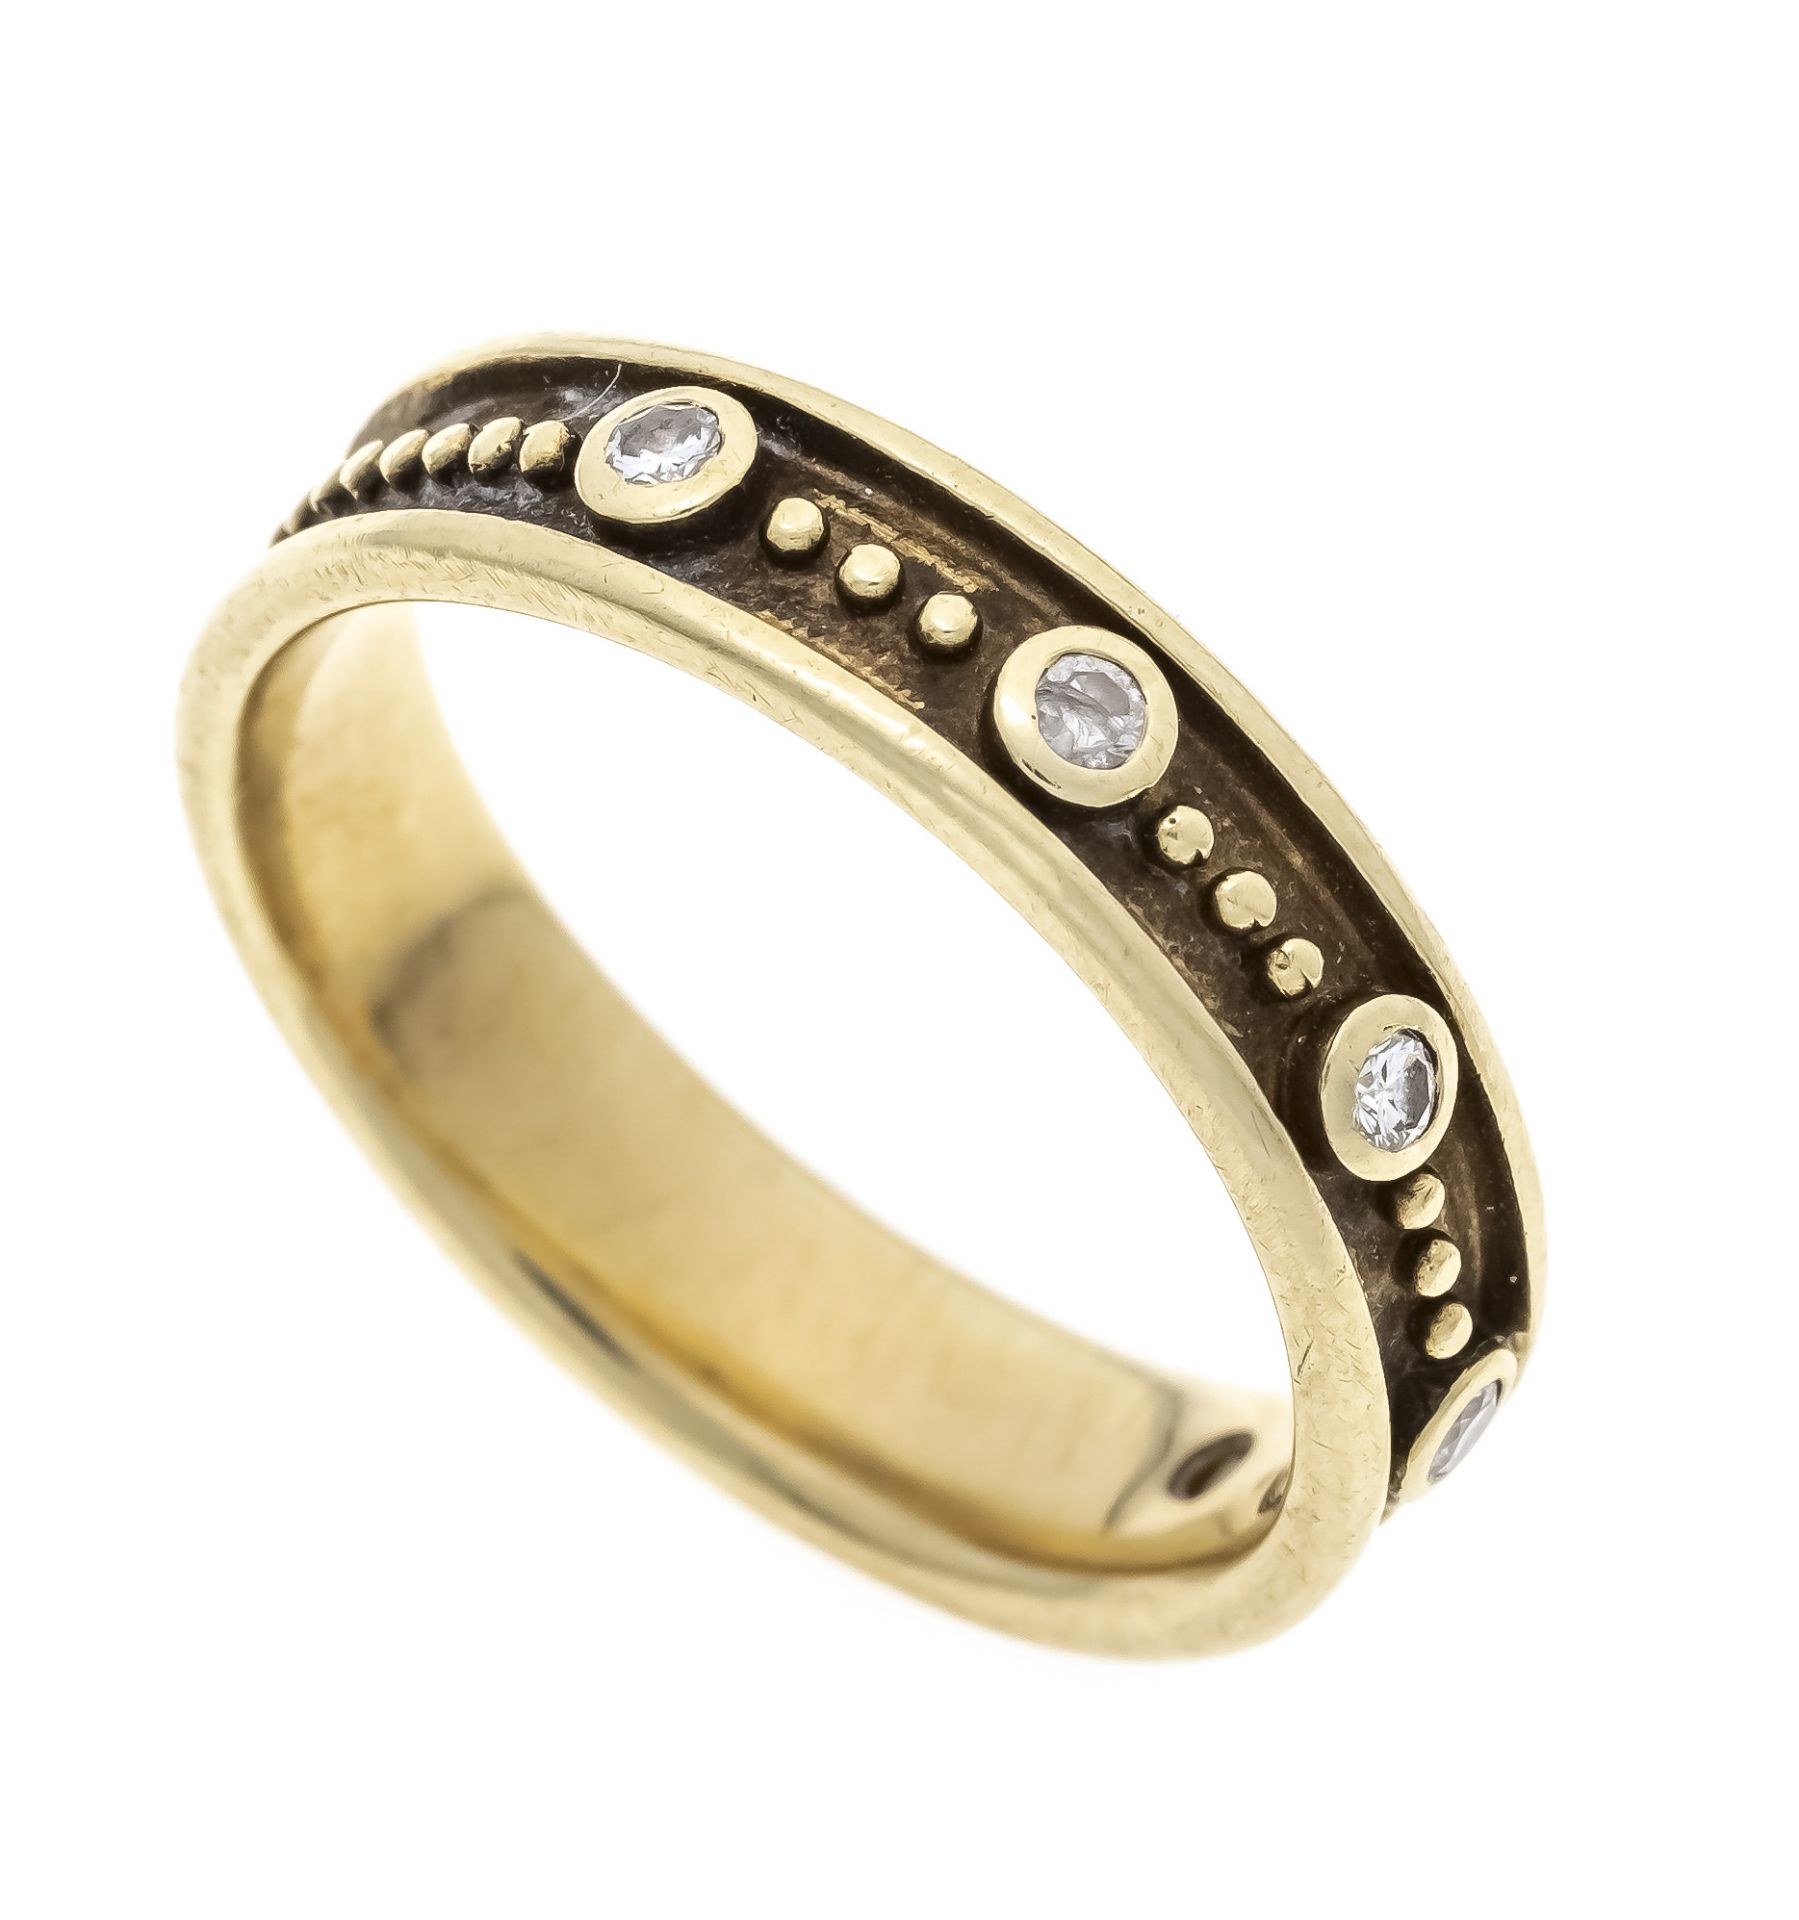 Brilliant ring GG 585/000 slightly blackened with granulate work, set with 5 brilliant-cut diamonds,